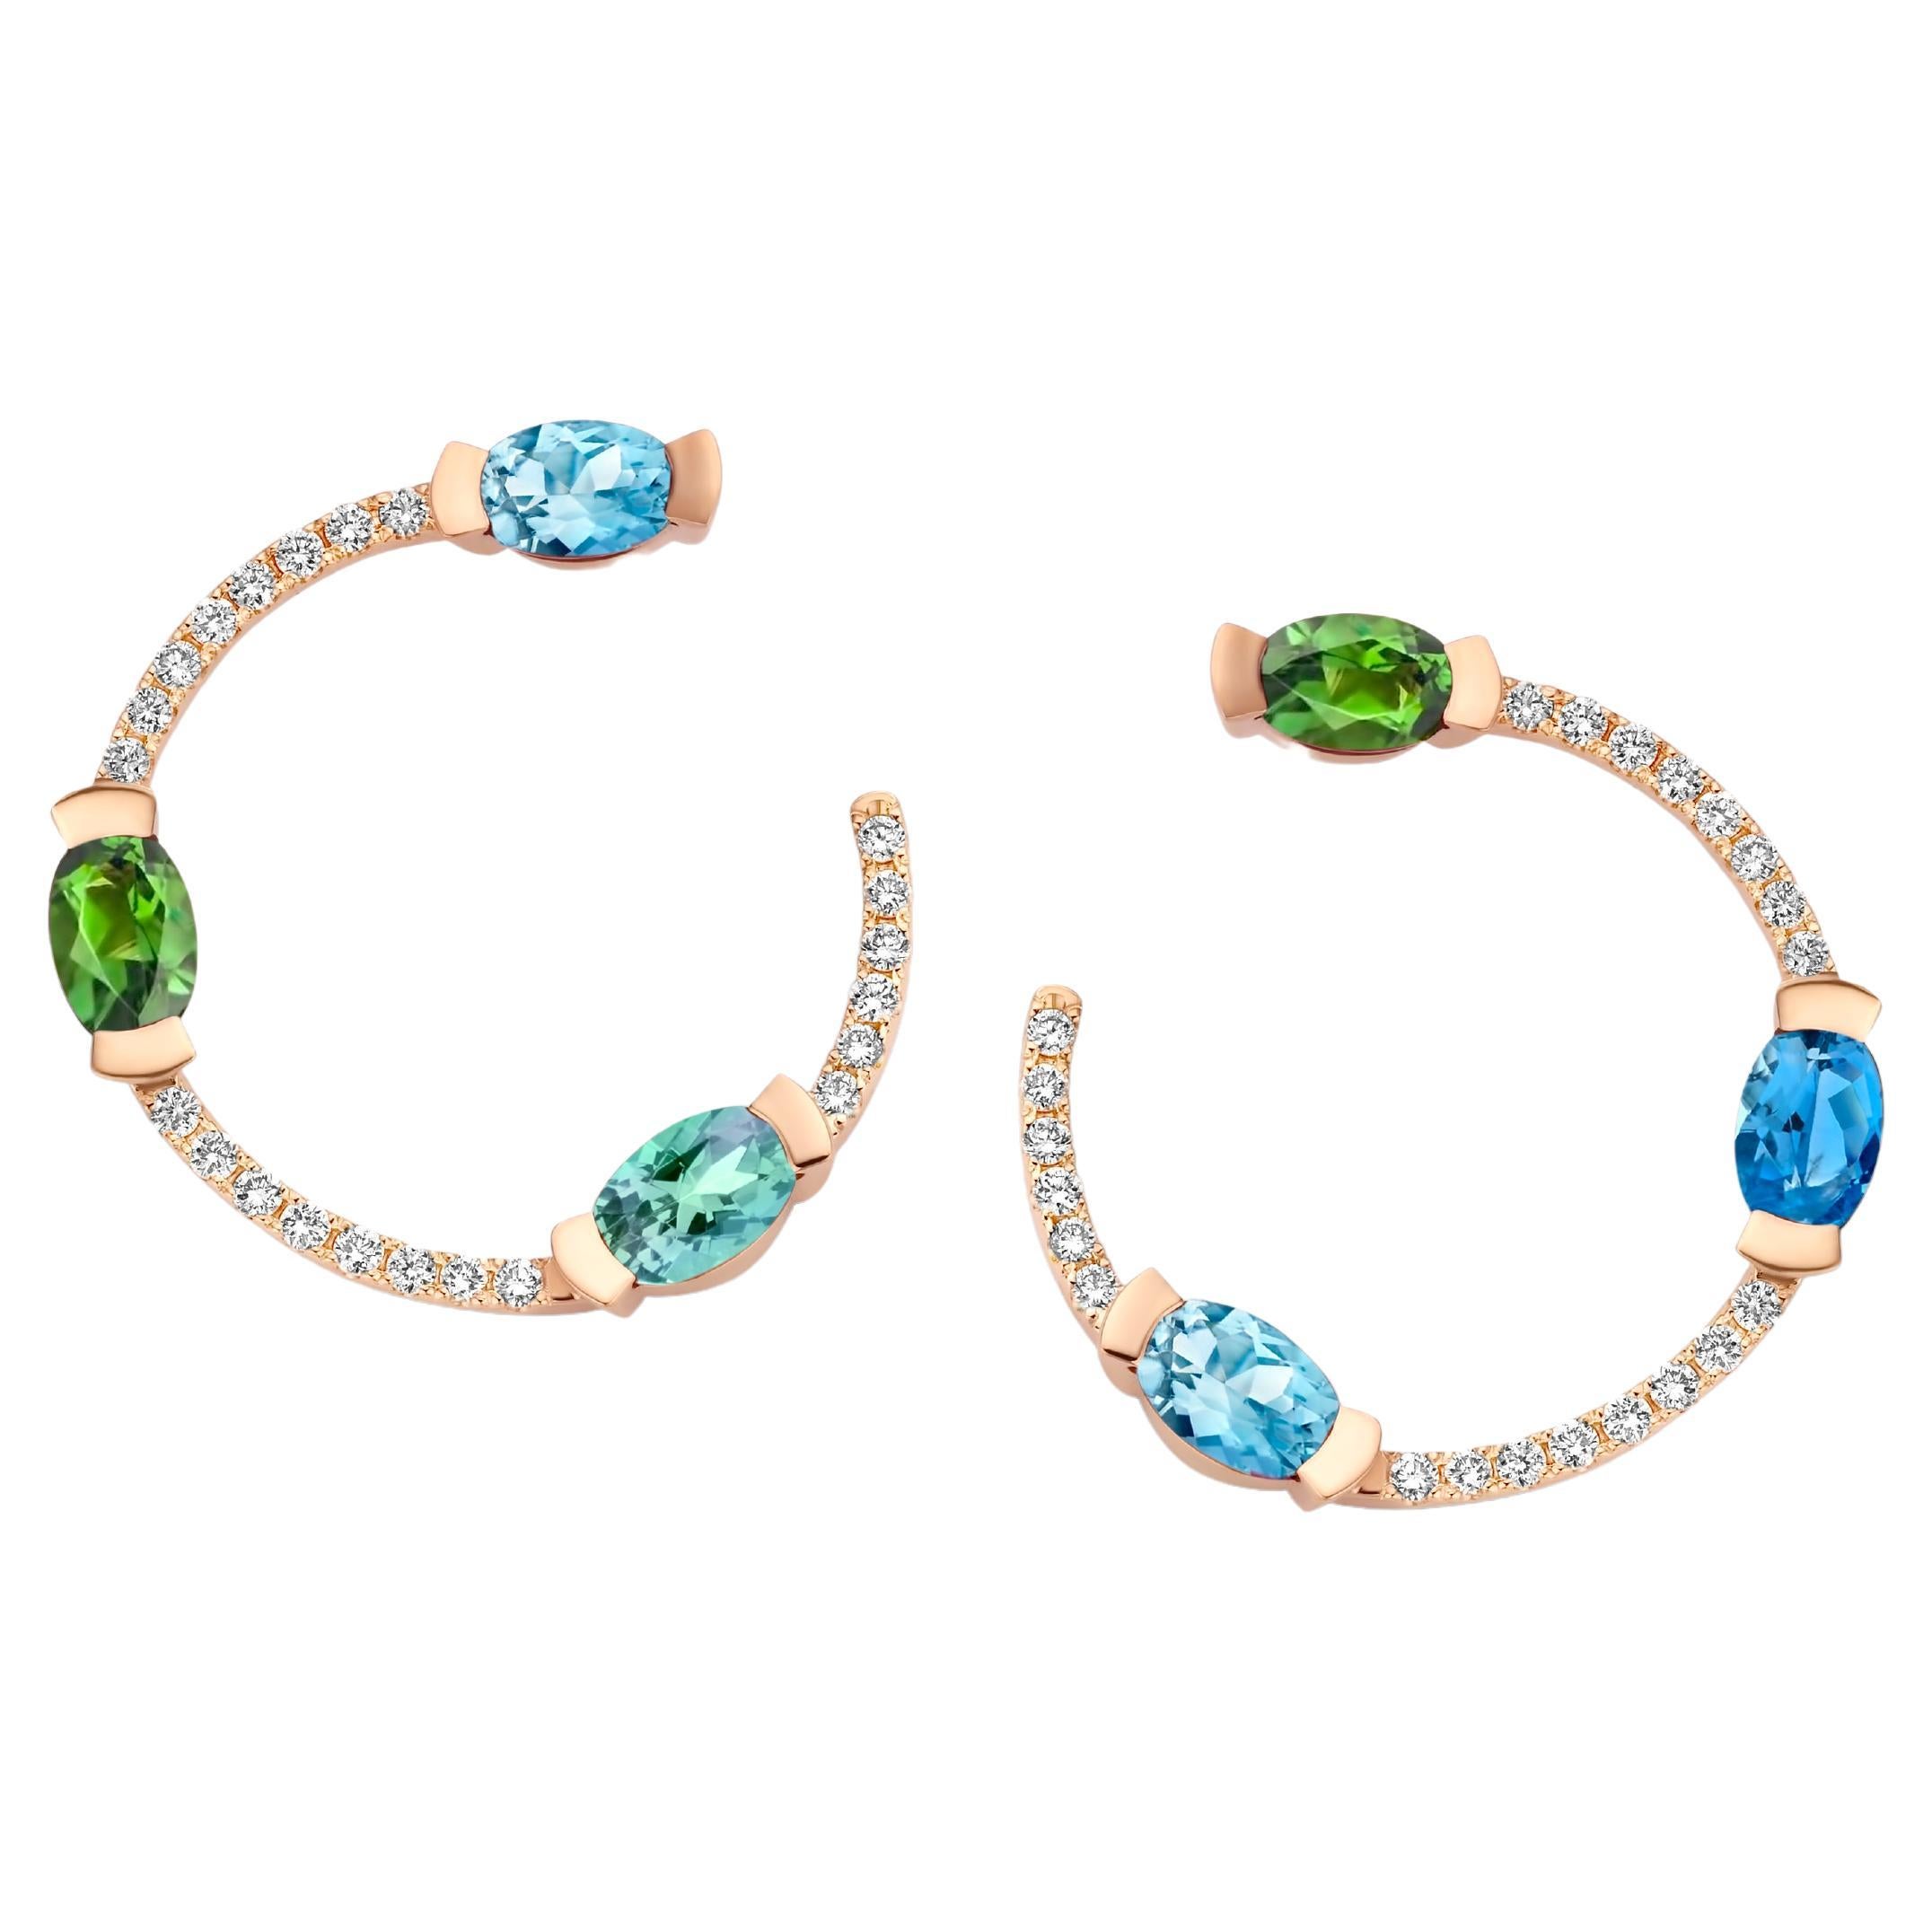 ADELINE trio curved earrings in 18Kt white gold set with an oval-shaped Aquamarine, an oval-shaped Green Tourmaline, an oval-shaped Mint Tourmaline, an oval-shaped Santa Maria Aquamarine and 0,44 Ct of white brilliant cut diamonds - VS F quality.